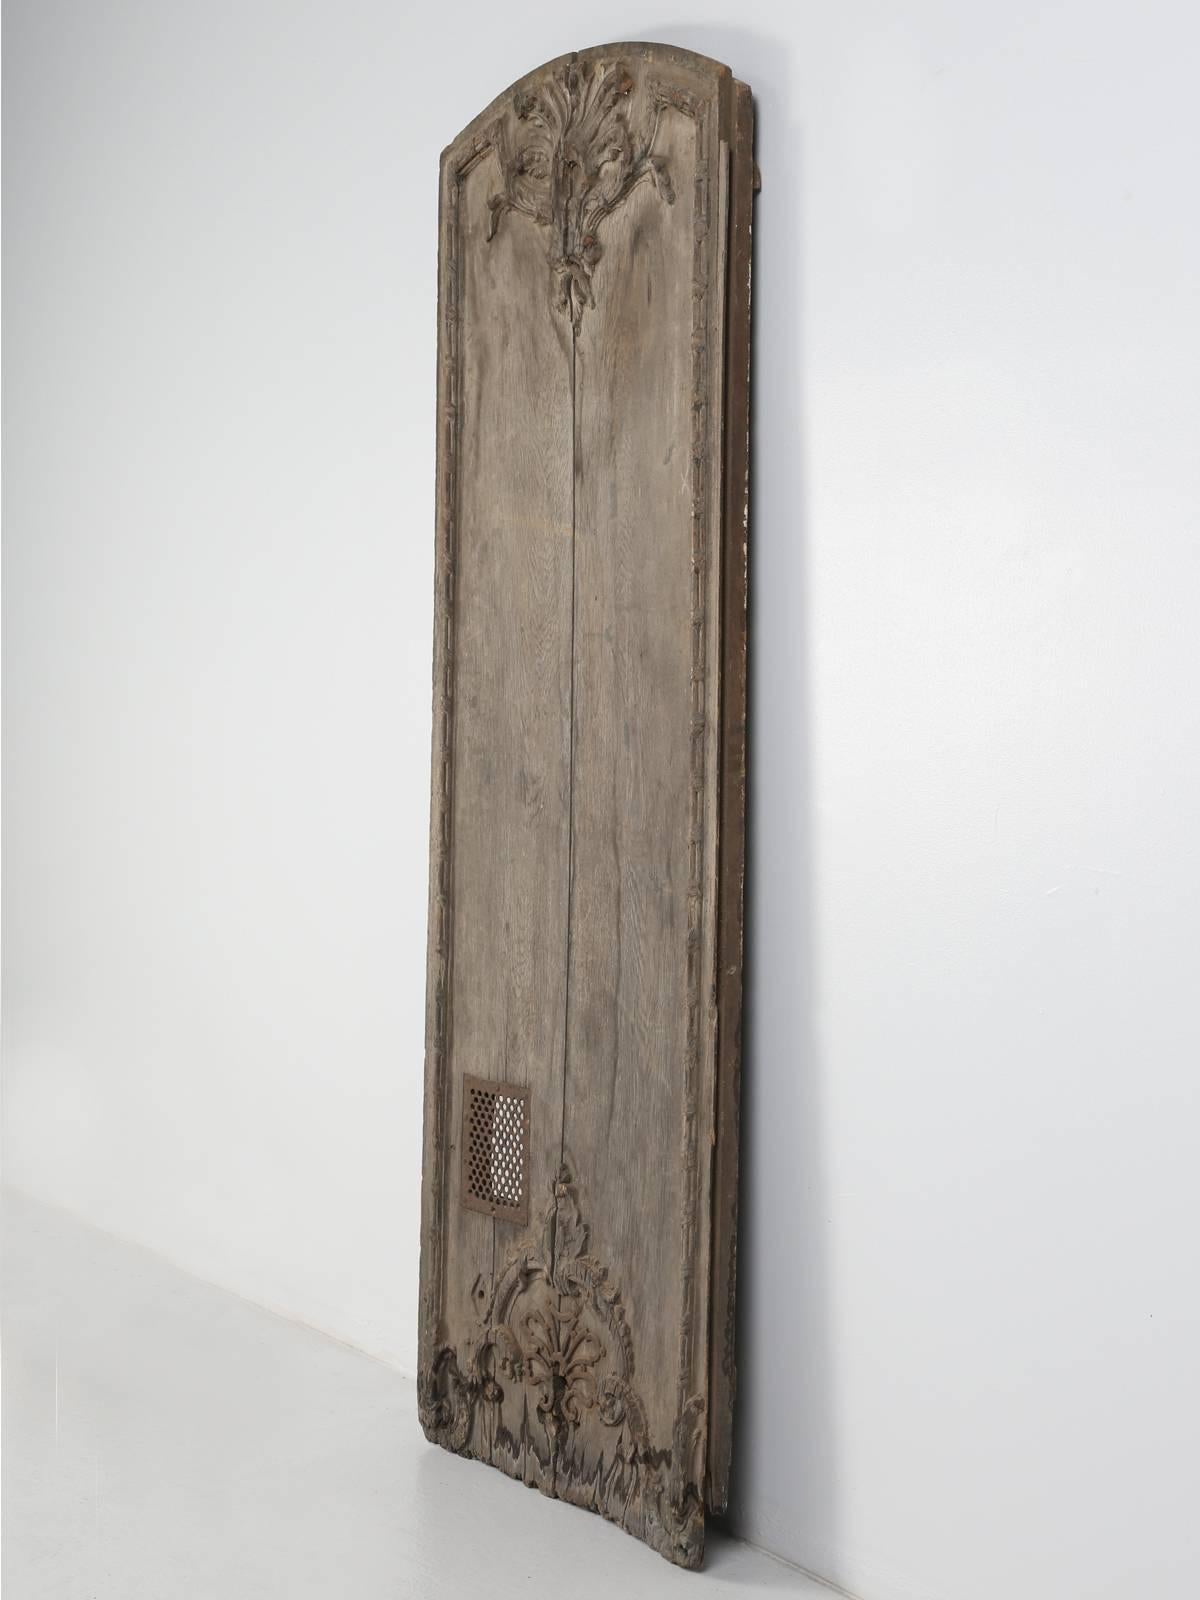 Antique French architectural carved panel or possibly a door from the early 1700s and it appears to be in completely un-restored condition. There is a grille at the bottom, which could have been for a small animal for air or for pies? All that I